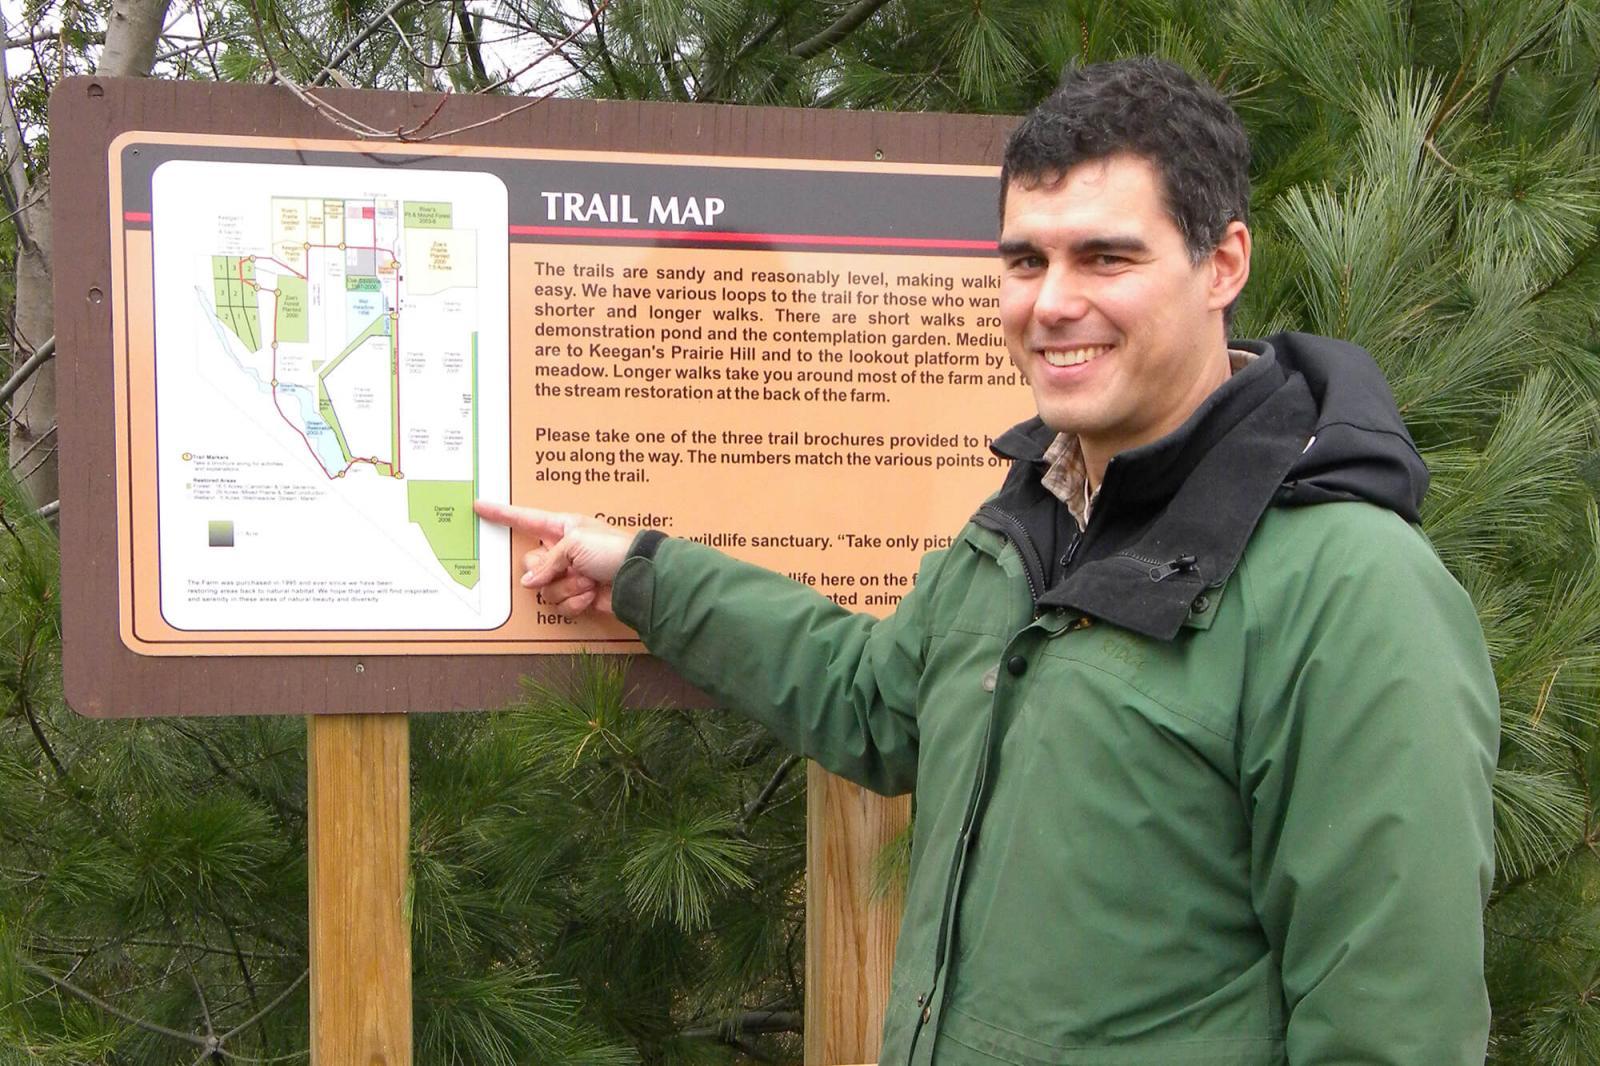 Visitors to the site may take their own tour, or one of the scheduled tour dates. Paul Morris shows map of the trails available on site.